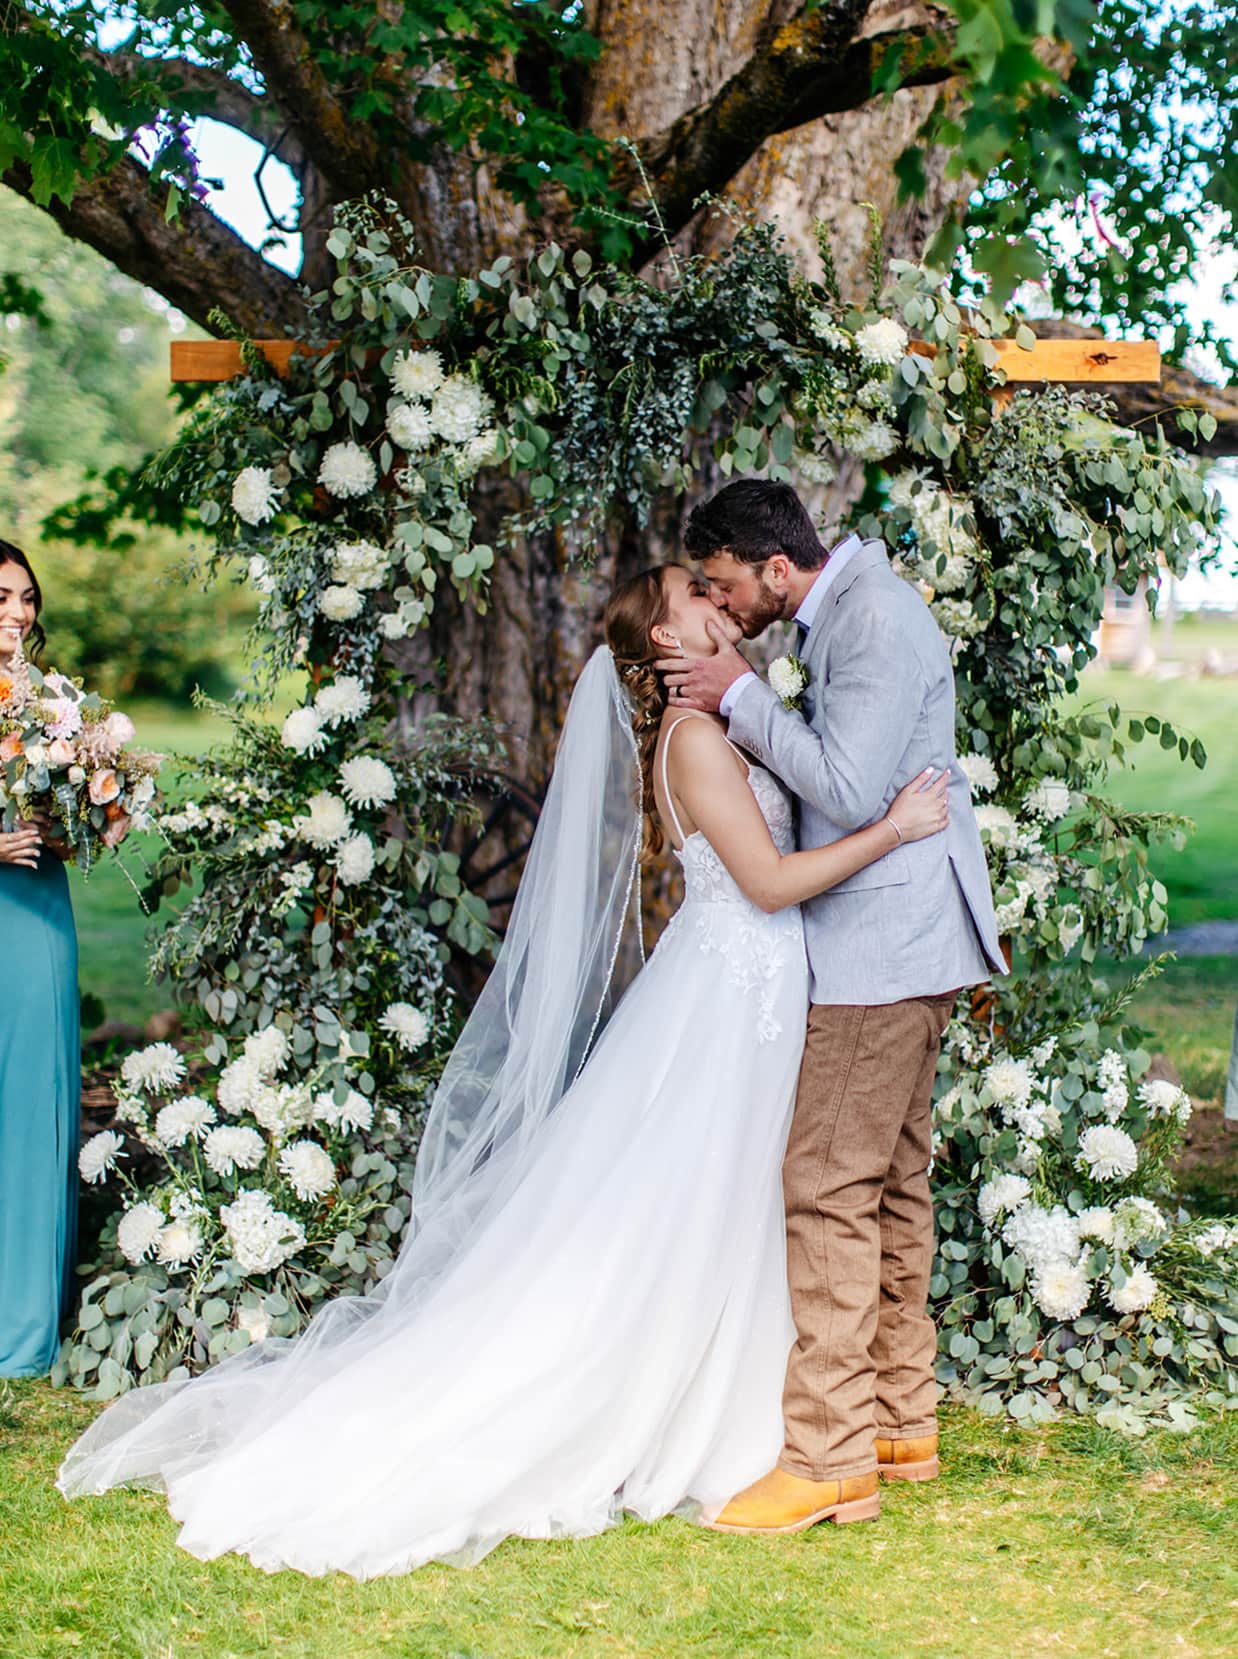 bride and groom share first kiss in front of floral arch during wedding ceremony at knotting hill farm in jordanville ny